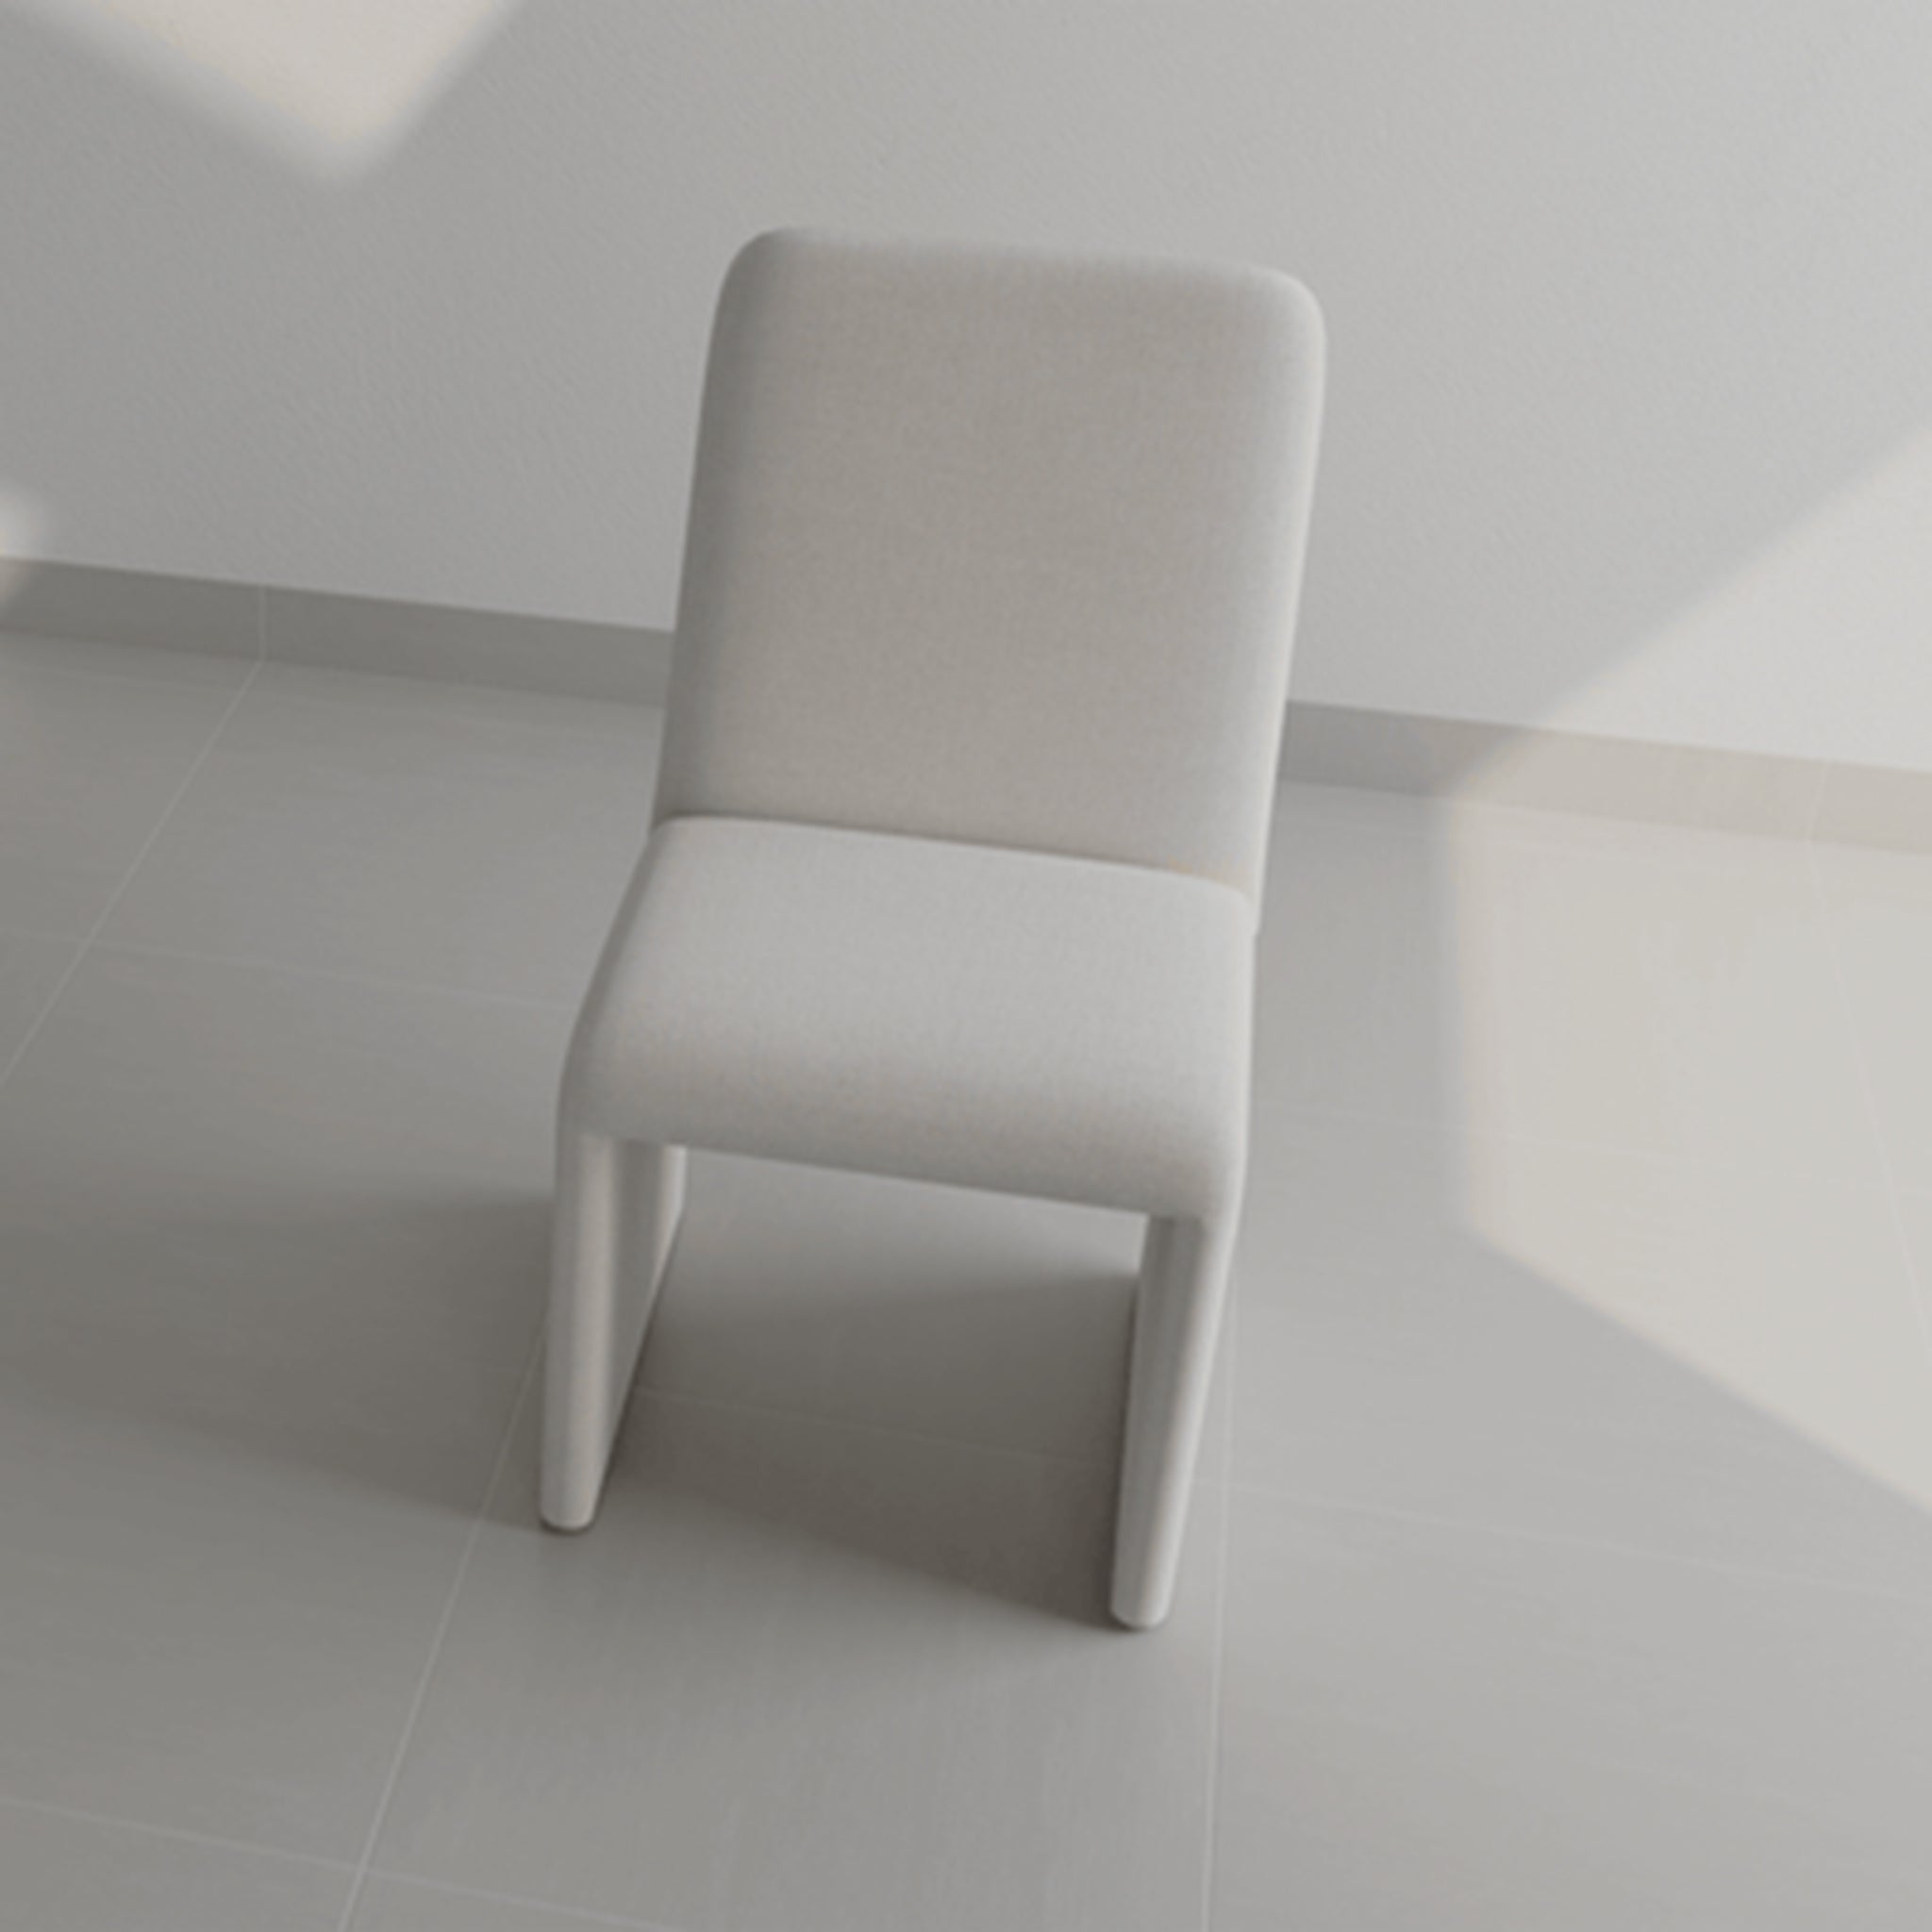 Modern dining chair with full upholstery in white fabric